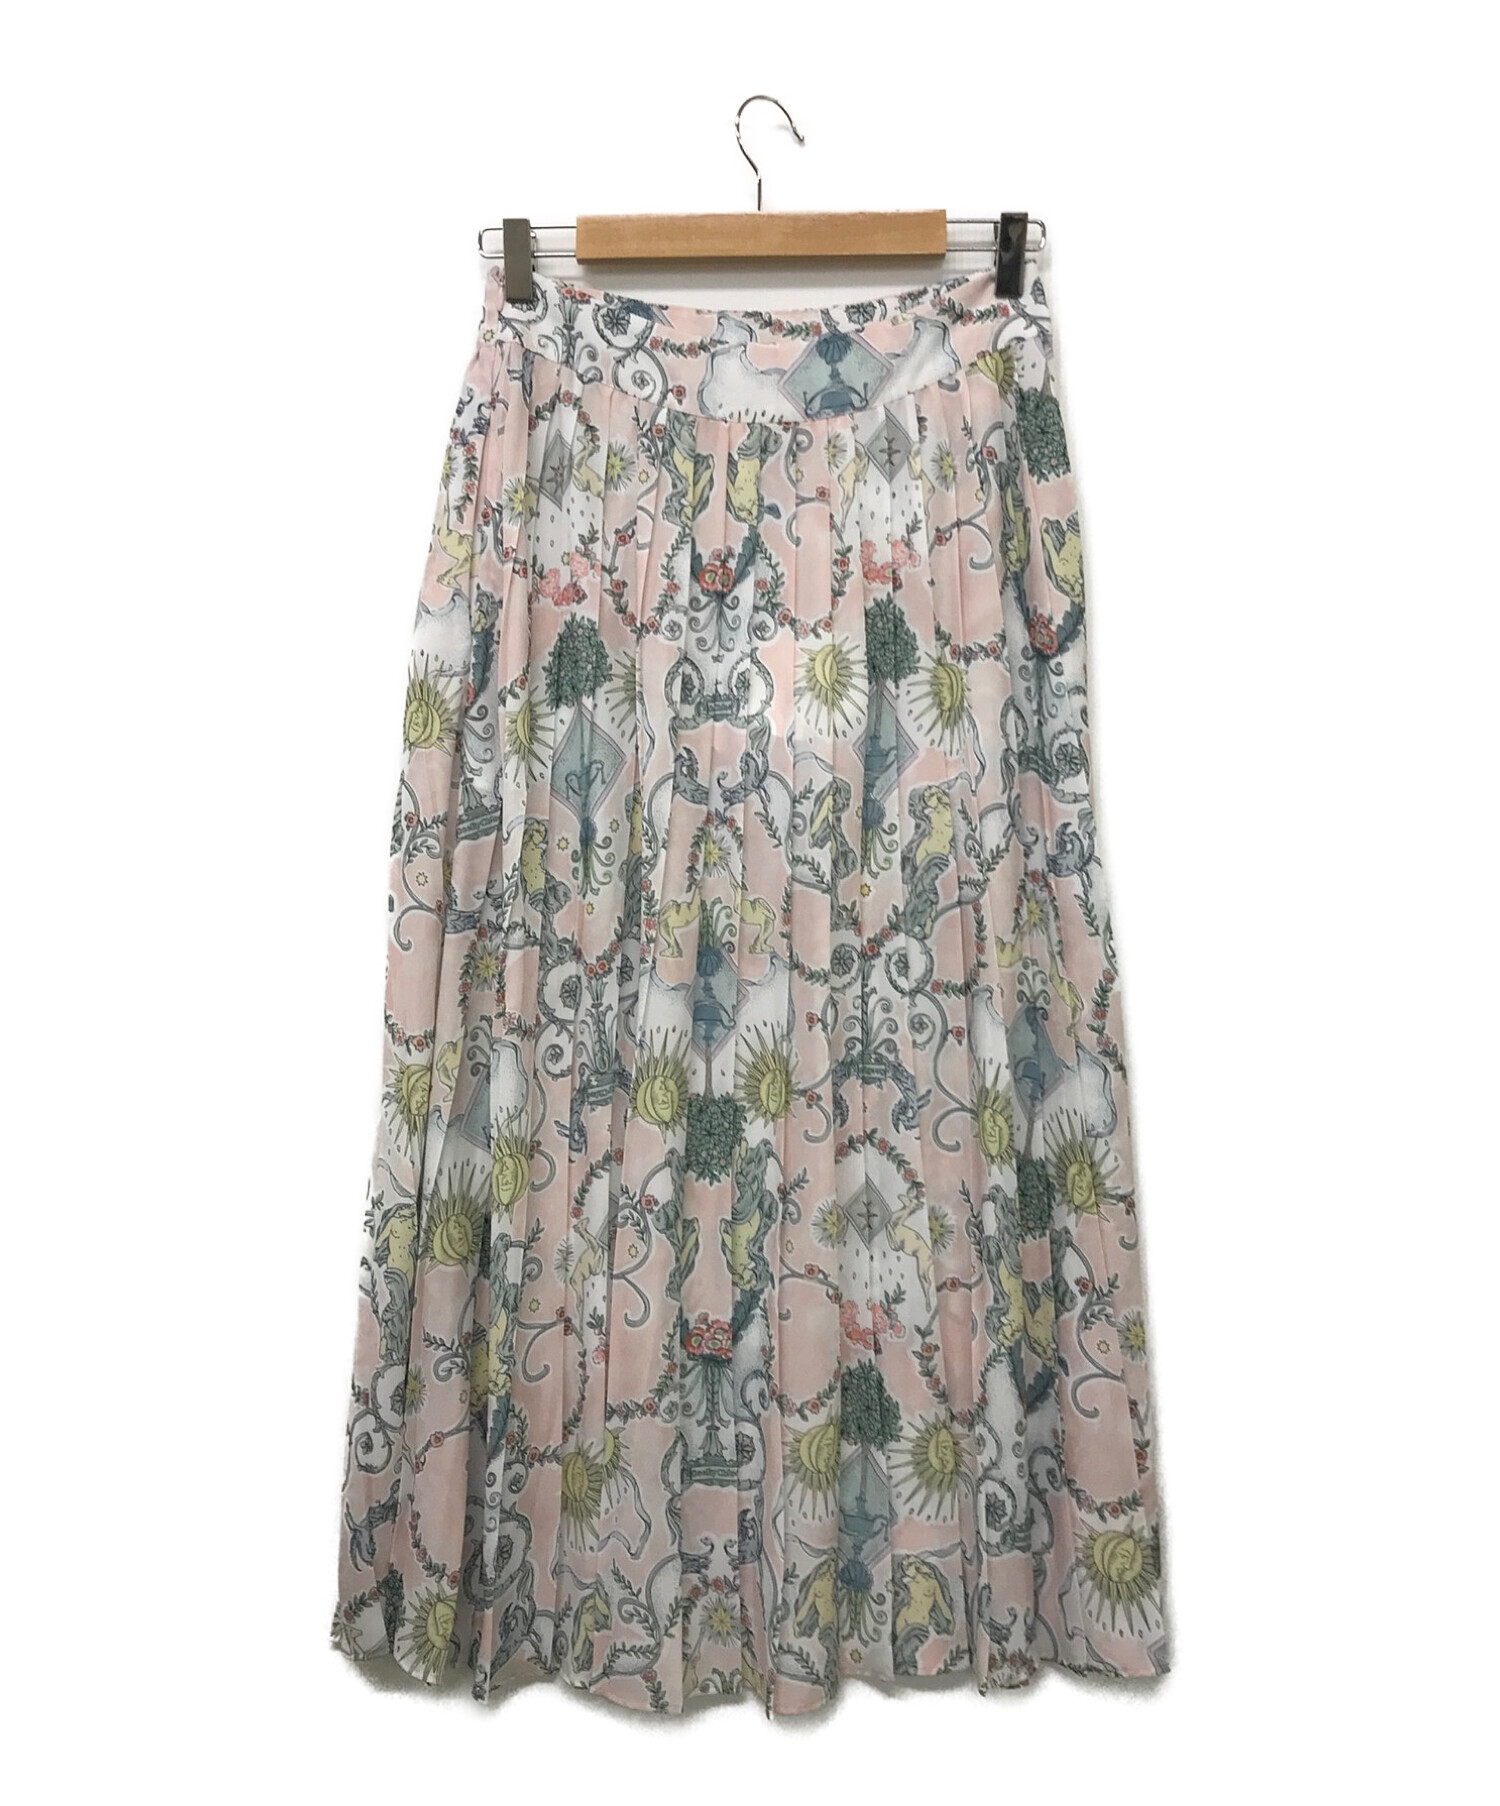 SEE BY CHLOE (シーバイクロエ) maxi skirt with print ピンク サイズ:38 未使用品